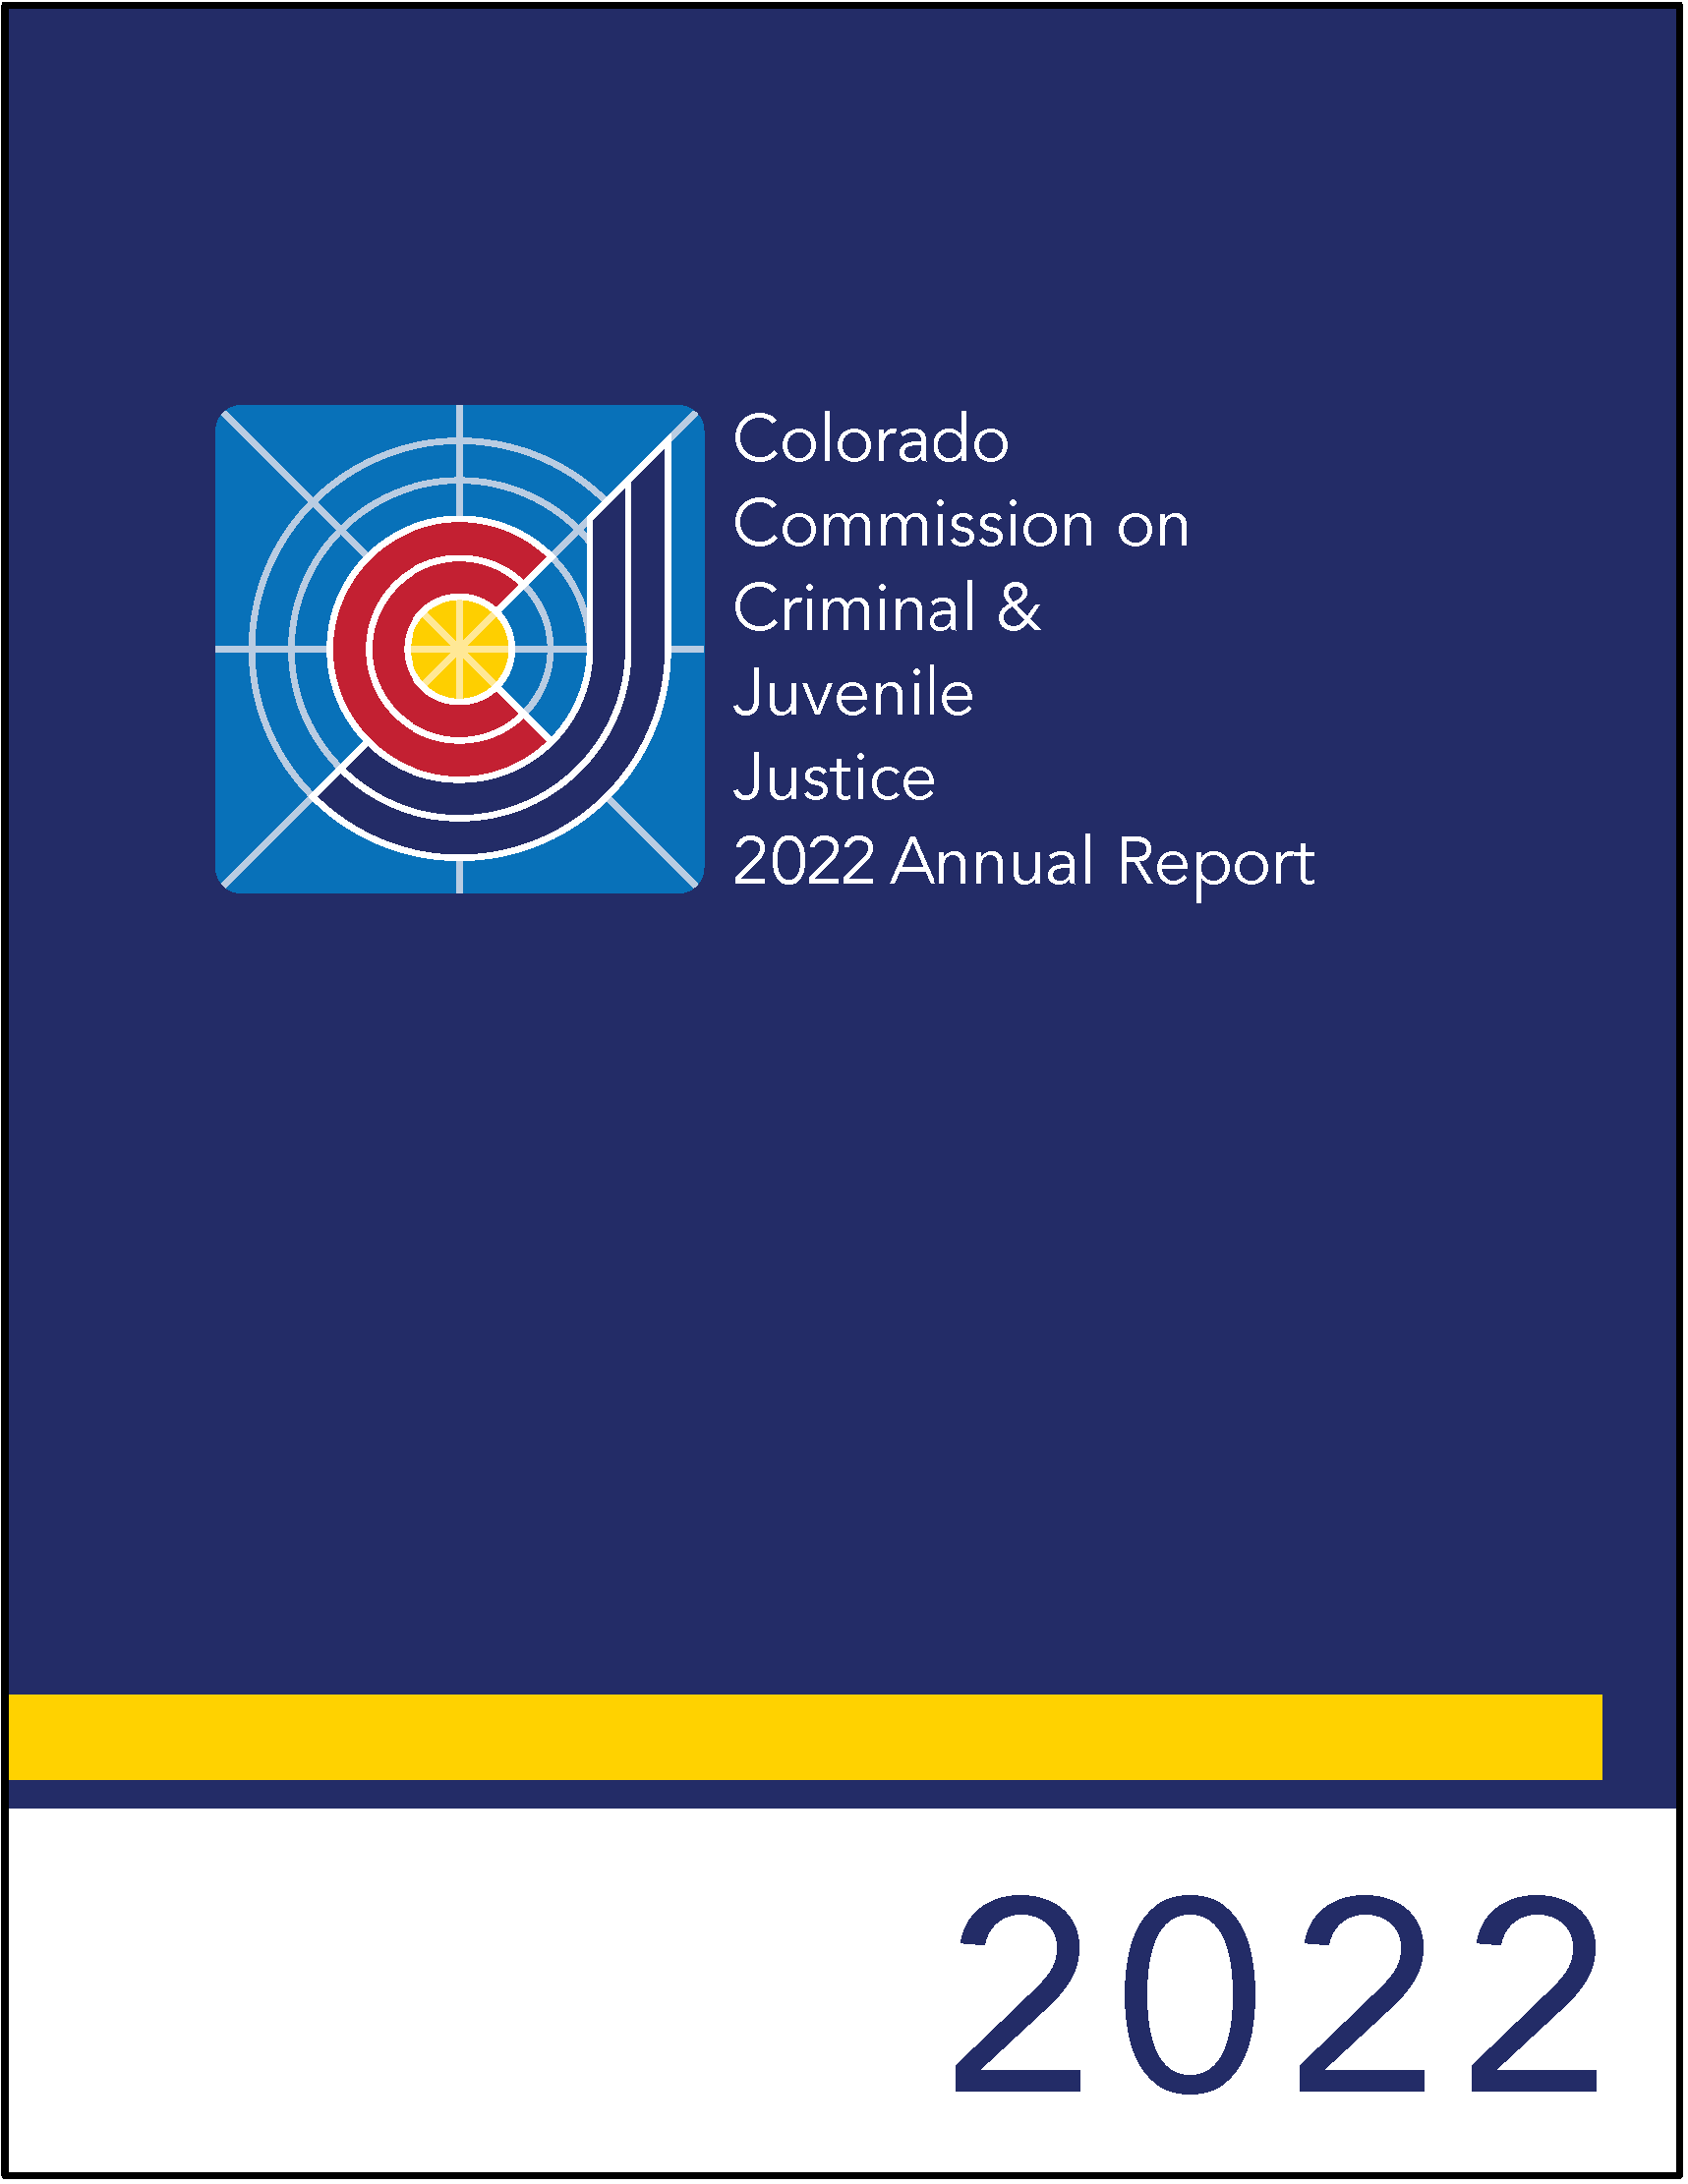 Colorado Commission on Criminal and Juvenile Justice: FY 2022 Annual Report